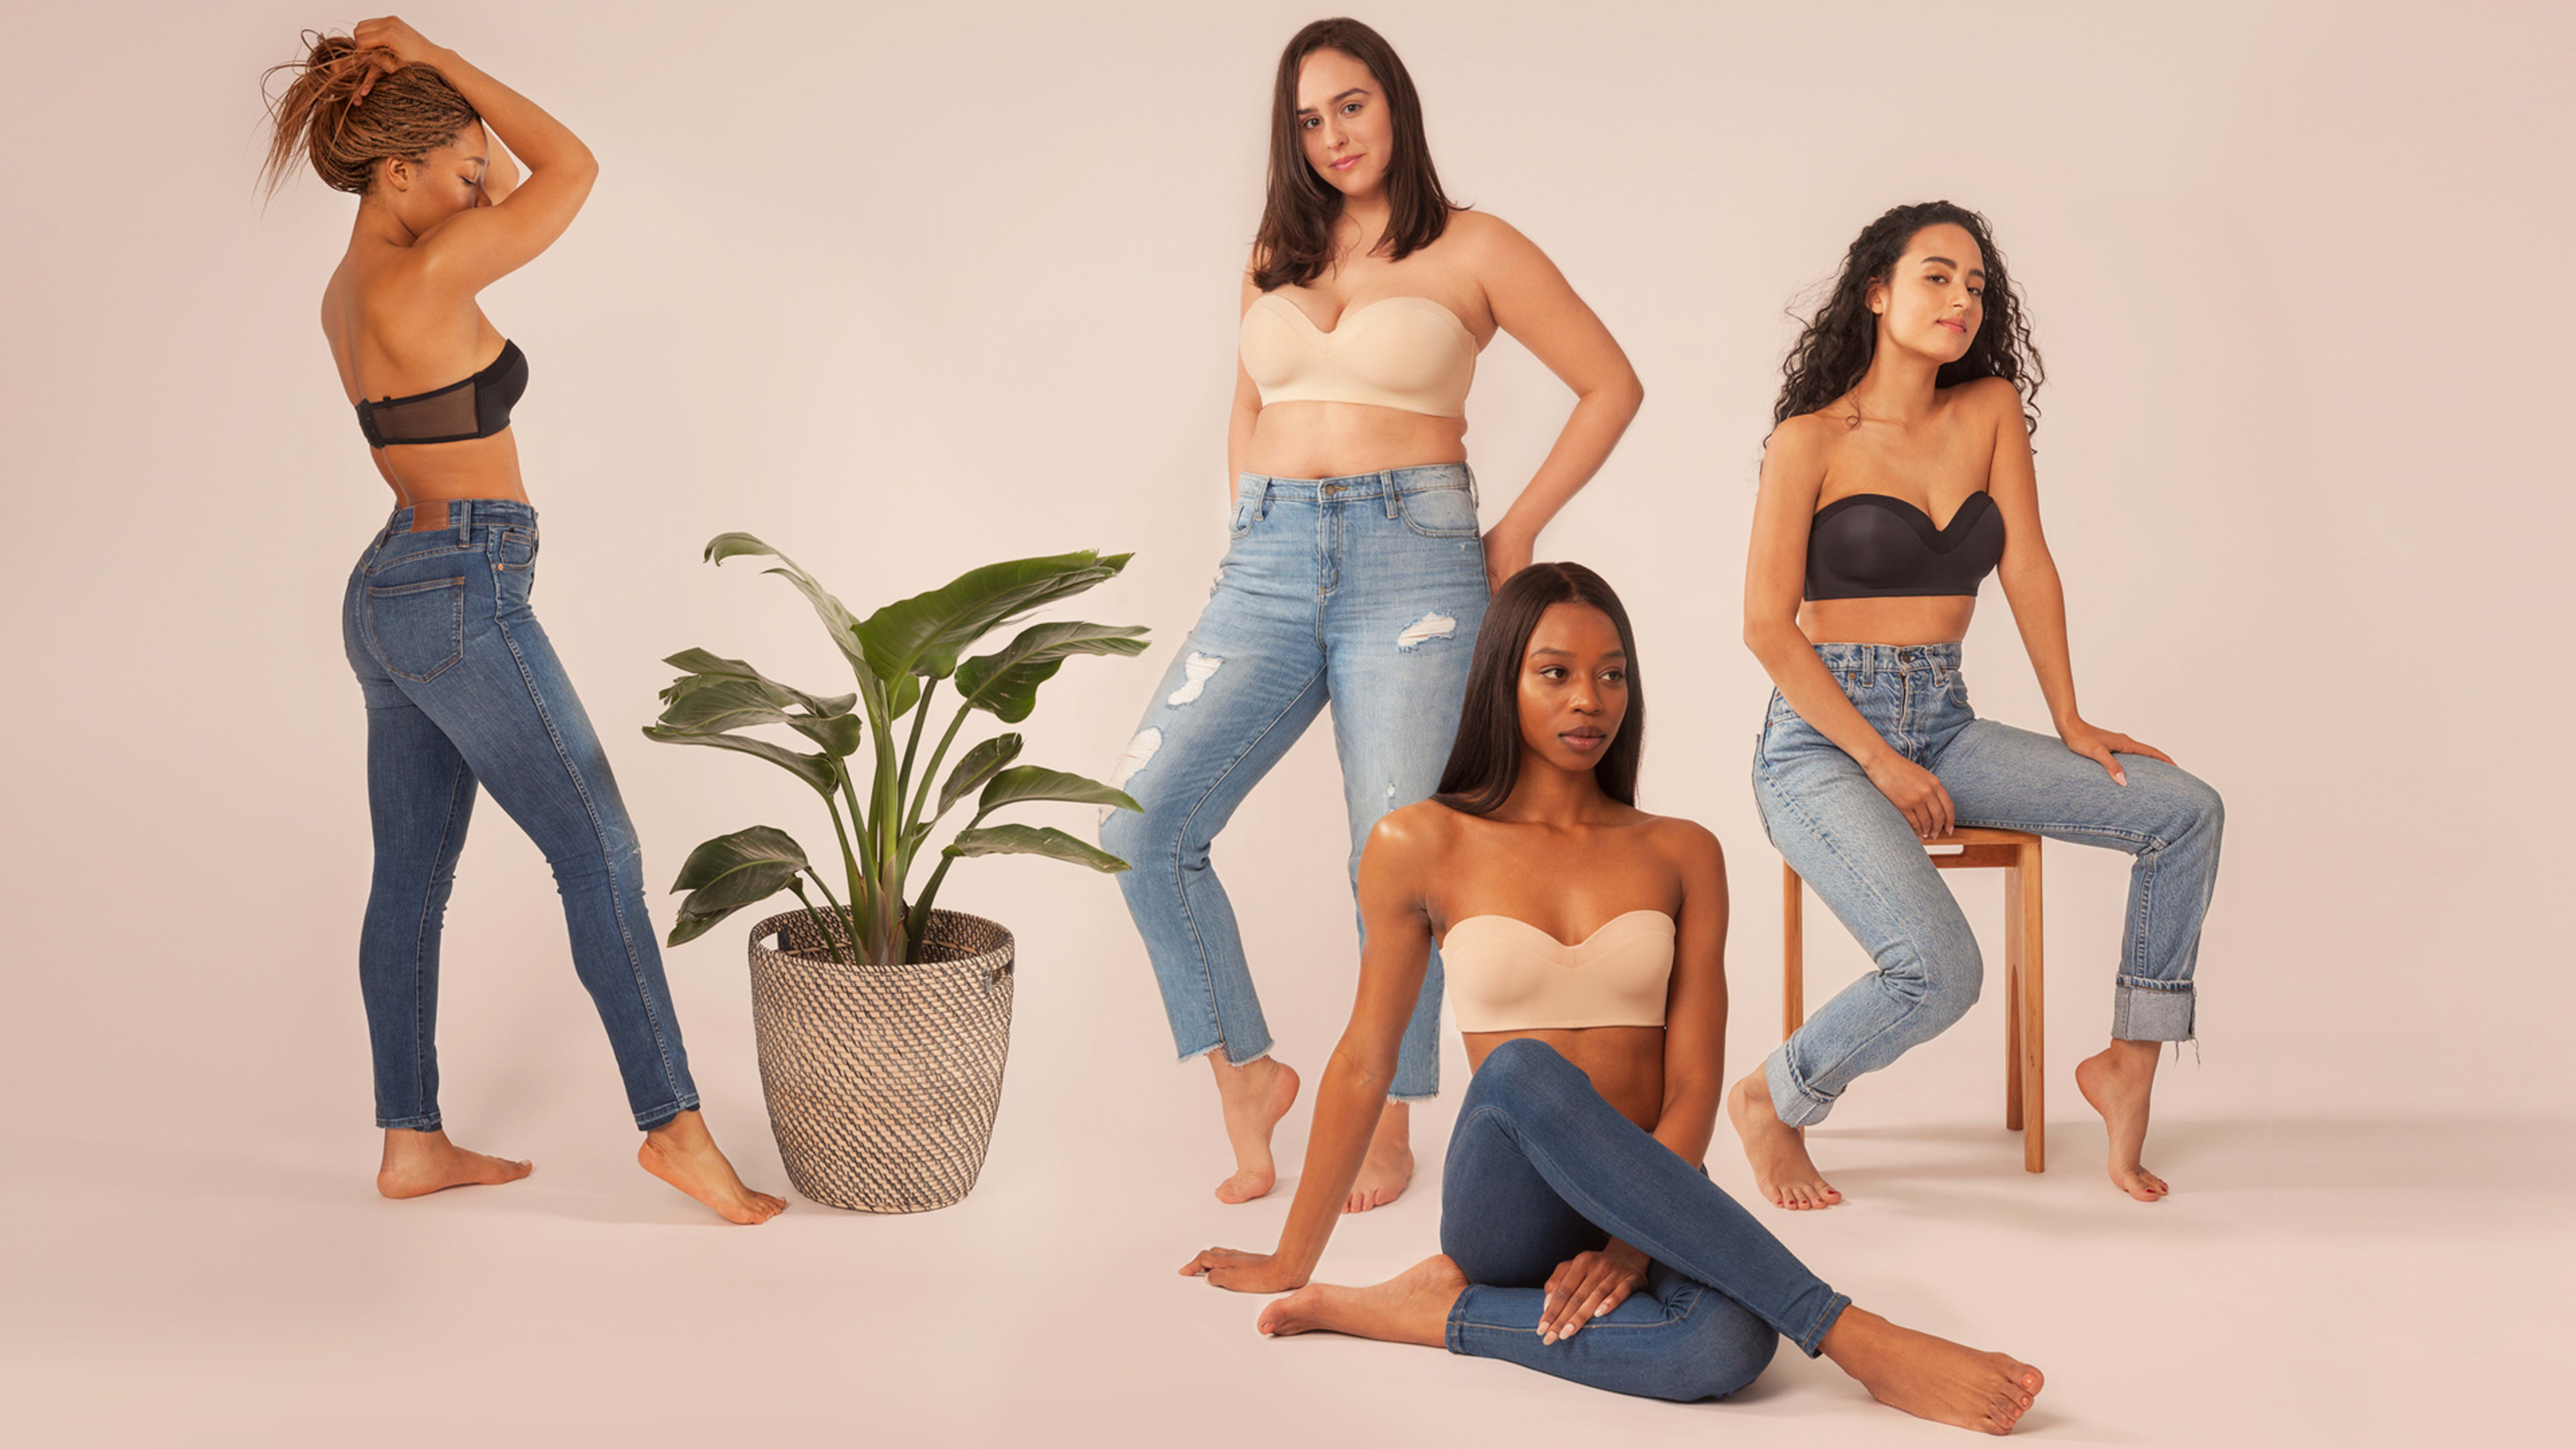 Post-#MeToo, this lingerie startup finds customers prefer images of real women